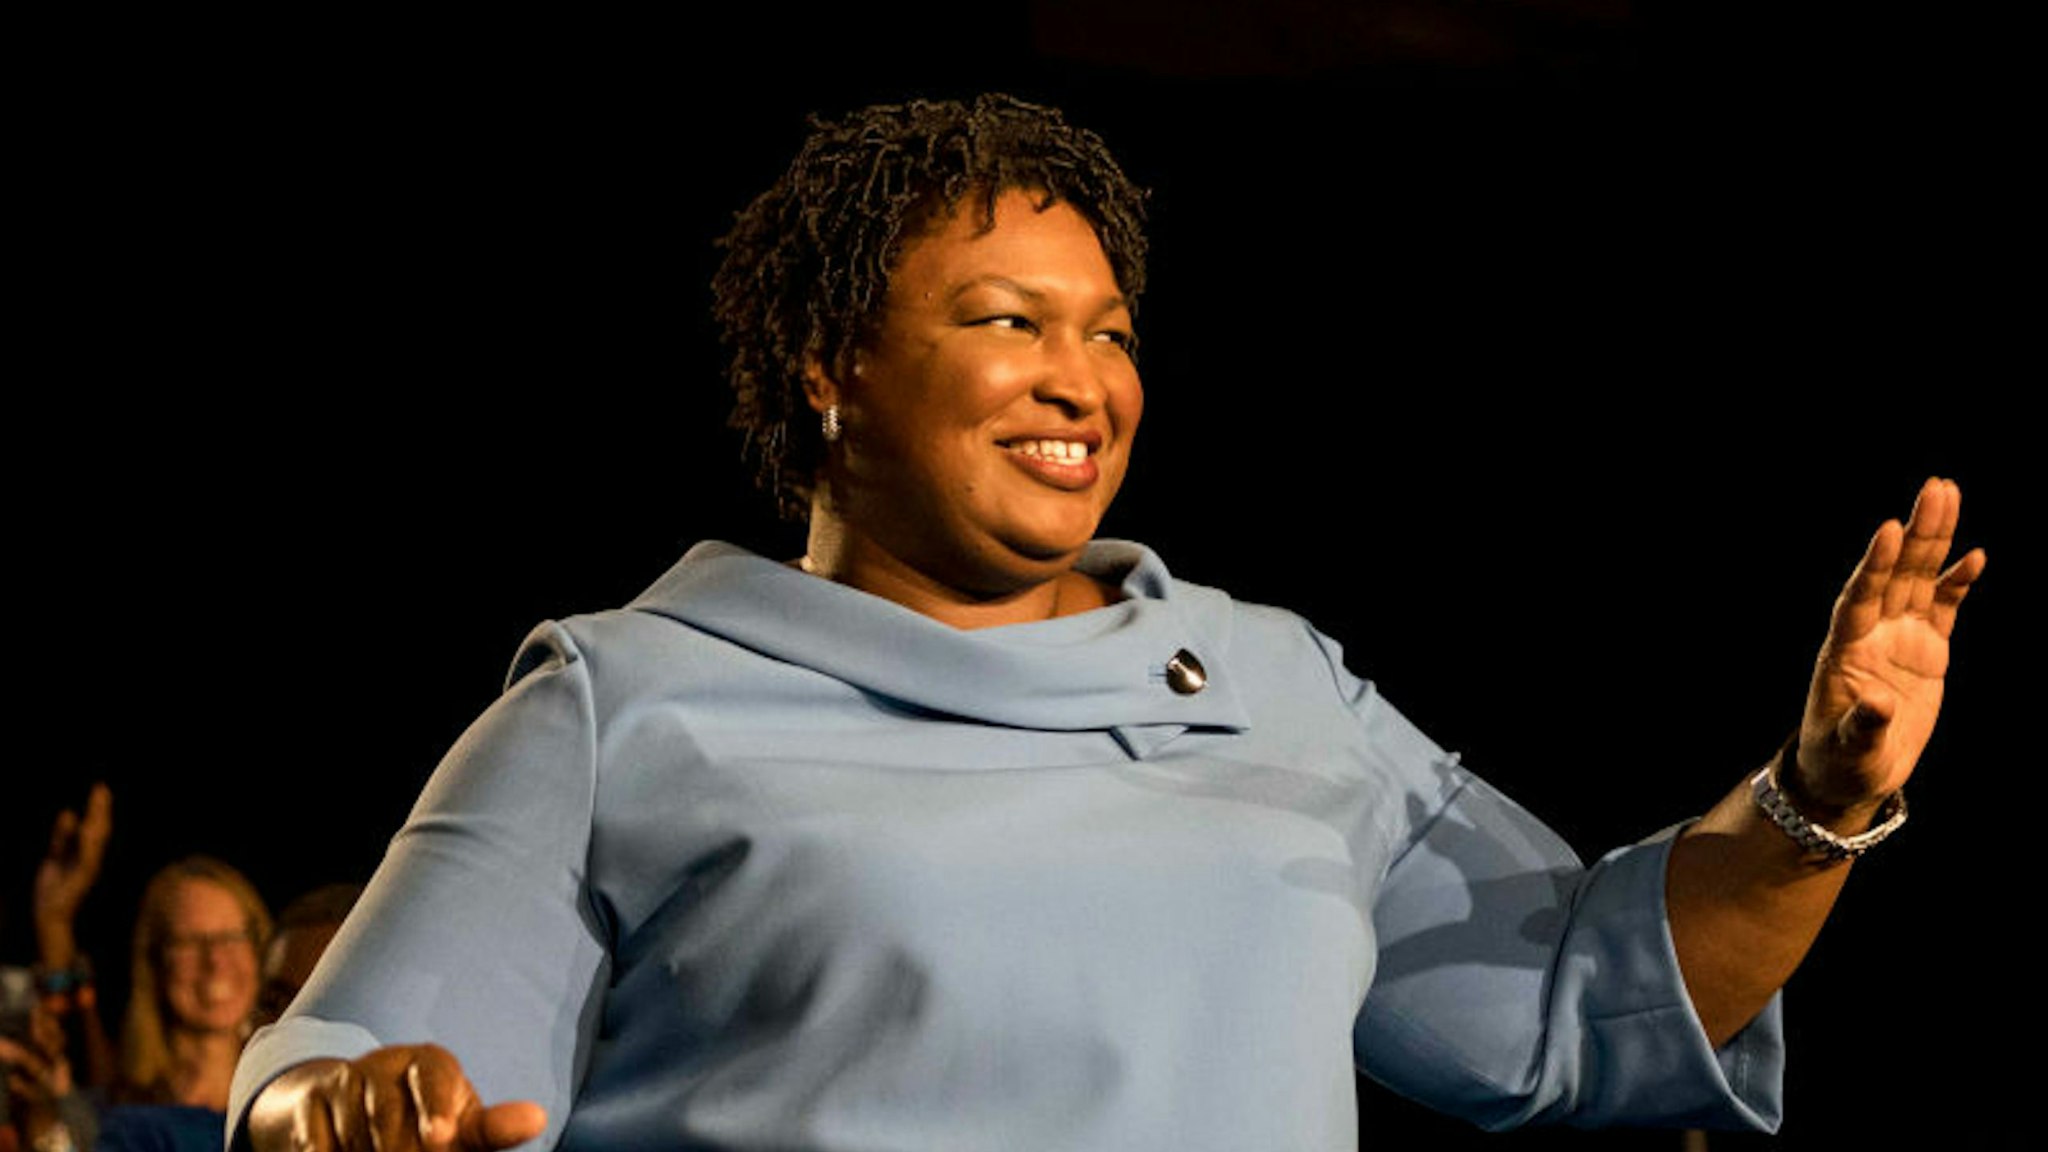 ATLANTA, GEORGIA - On a late election night Democratic nominee for Governor Stacey Abrams speaks to cheering supporters and announced that she'll be in in a runoff with her opponent, at the Hyatt Regency in Atlanta, Georgia on Tuesday November 6, 2018.